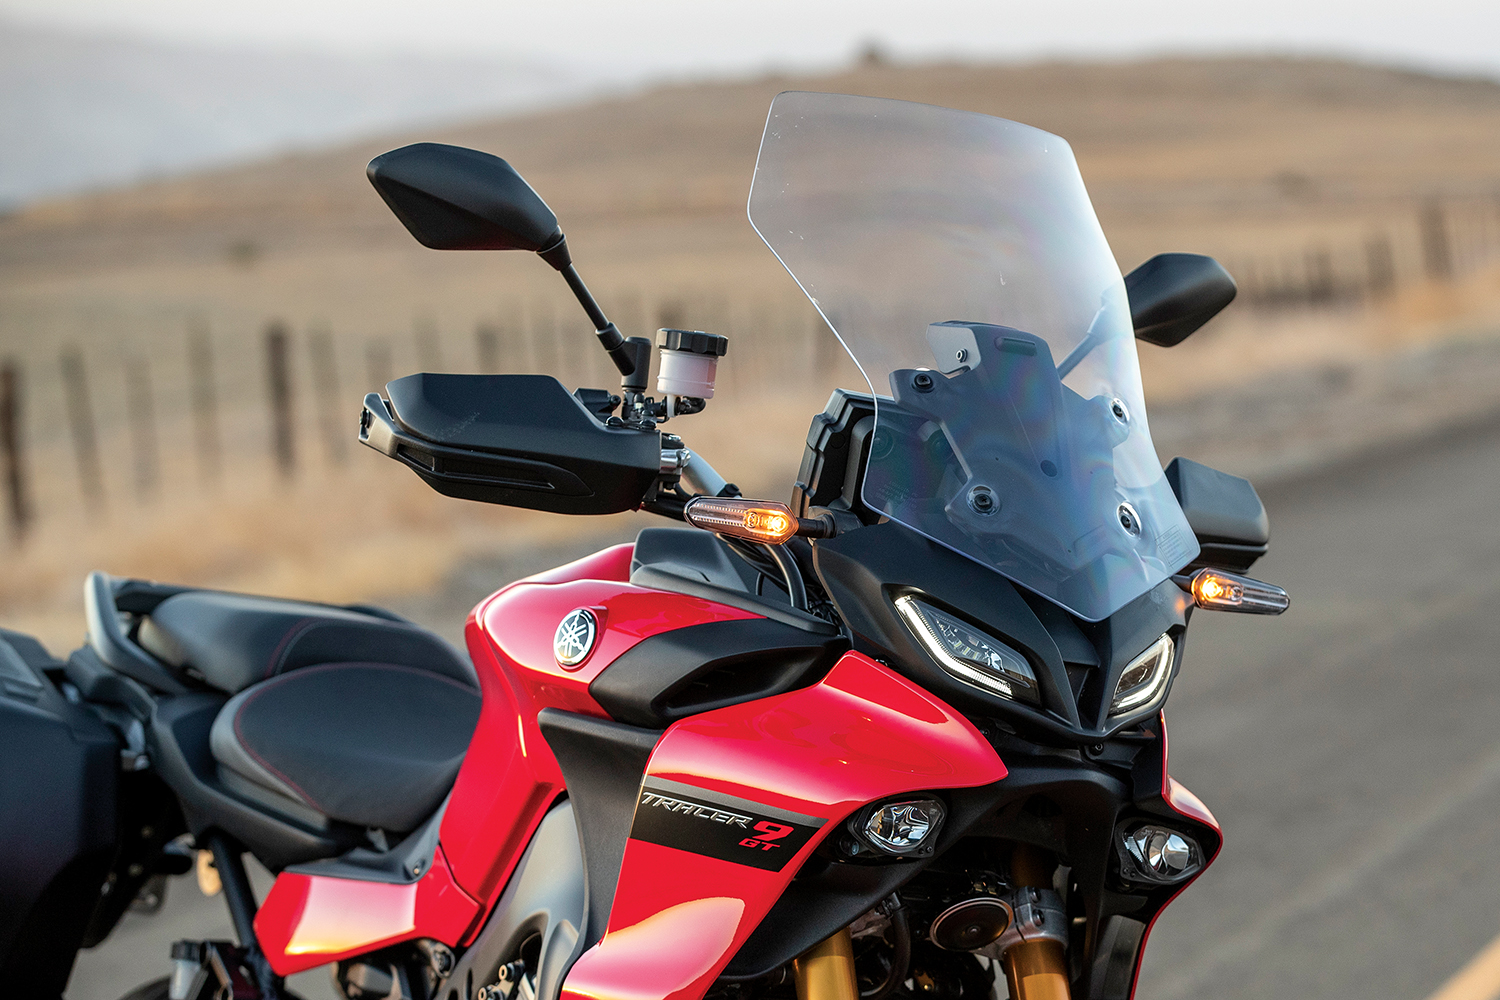 Yamaha Tracer 9 and GT (2021+, 890c) Maintenance Schedule